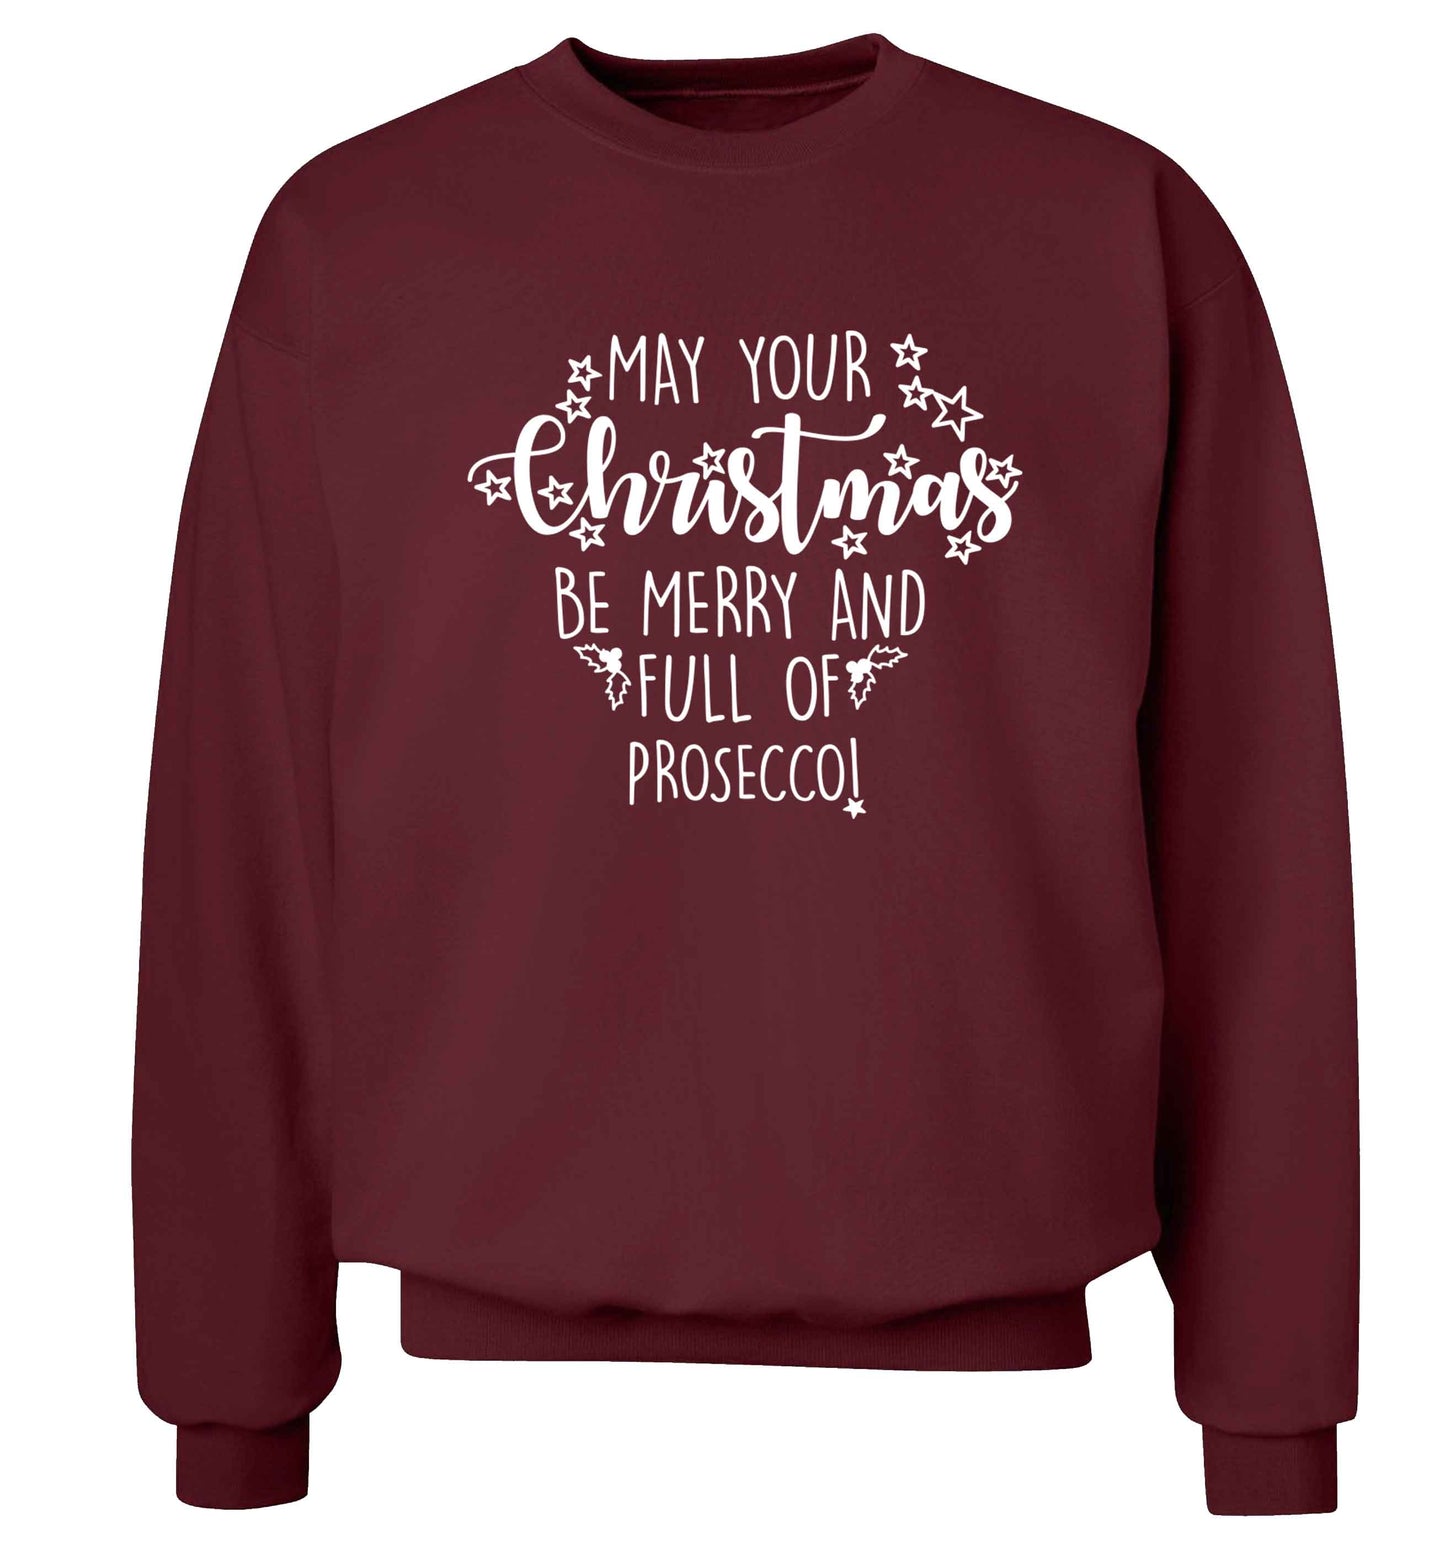 May your Christmas be merry and full of prosecco Adult's unisex maroon Sweater 2XL